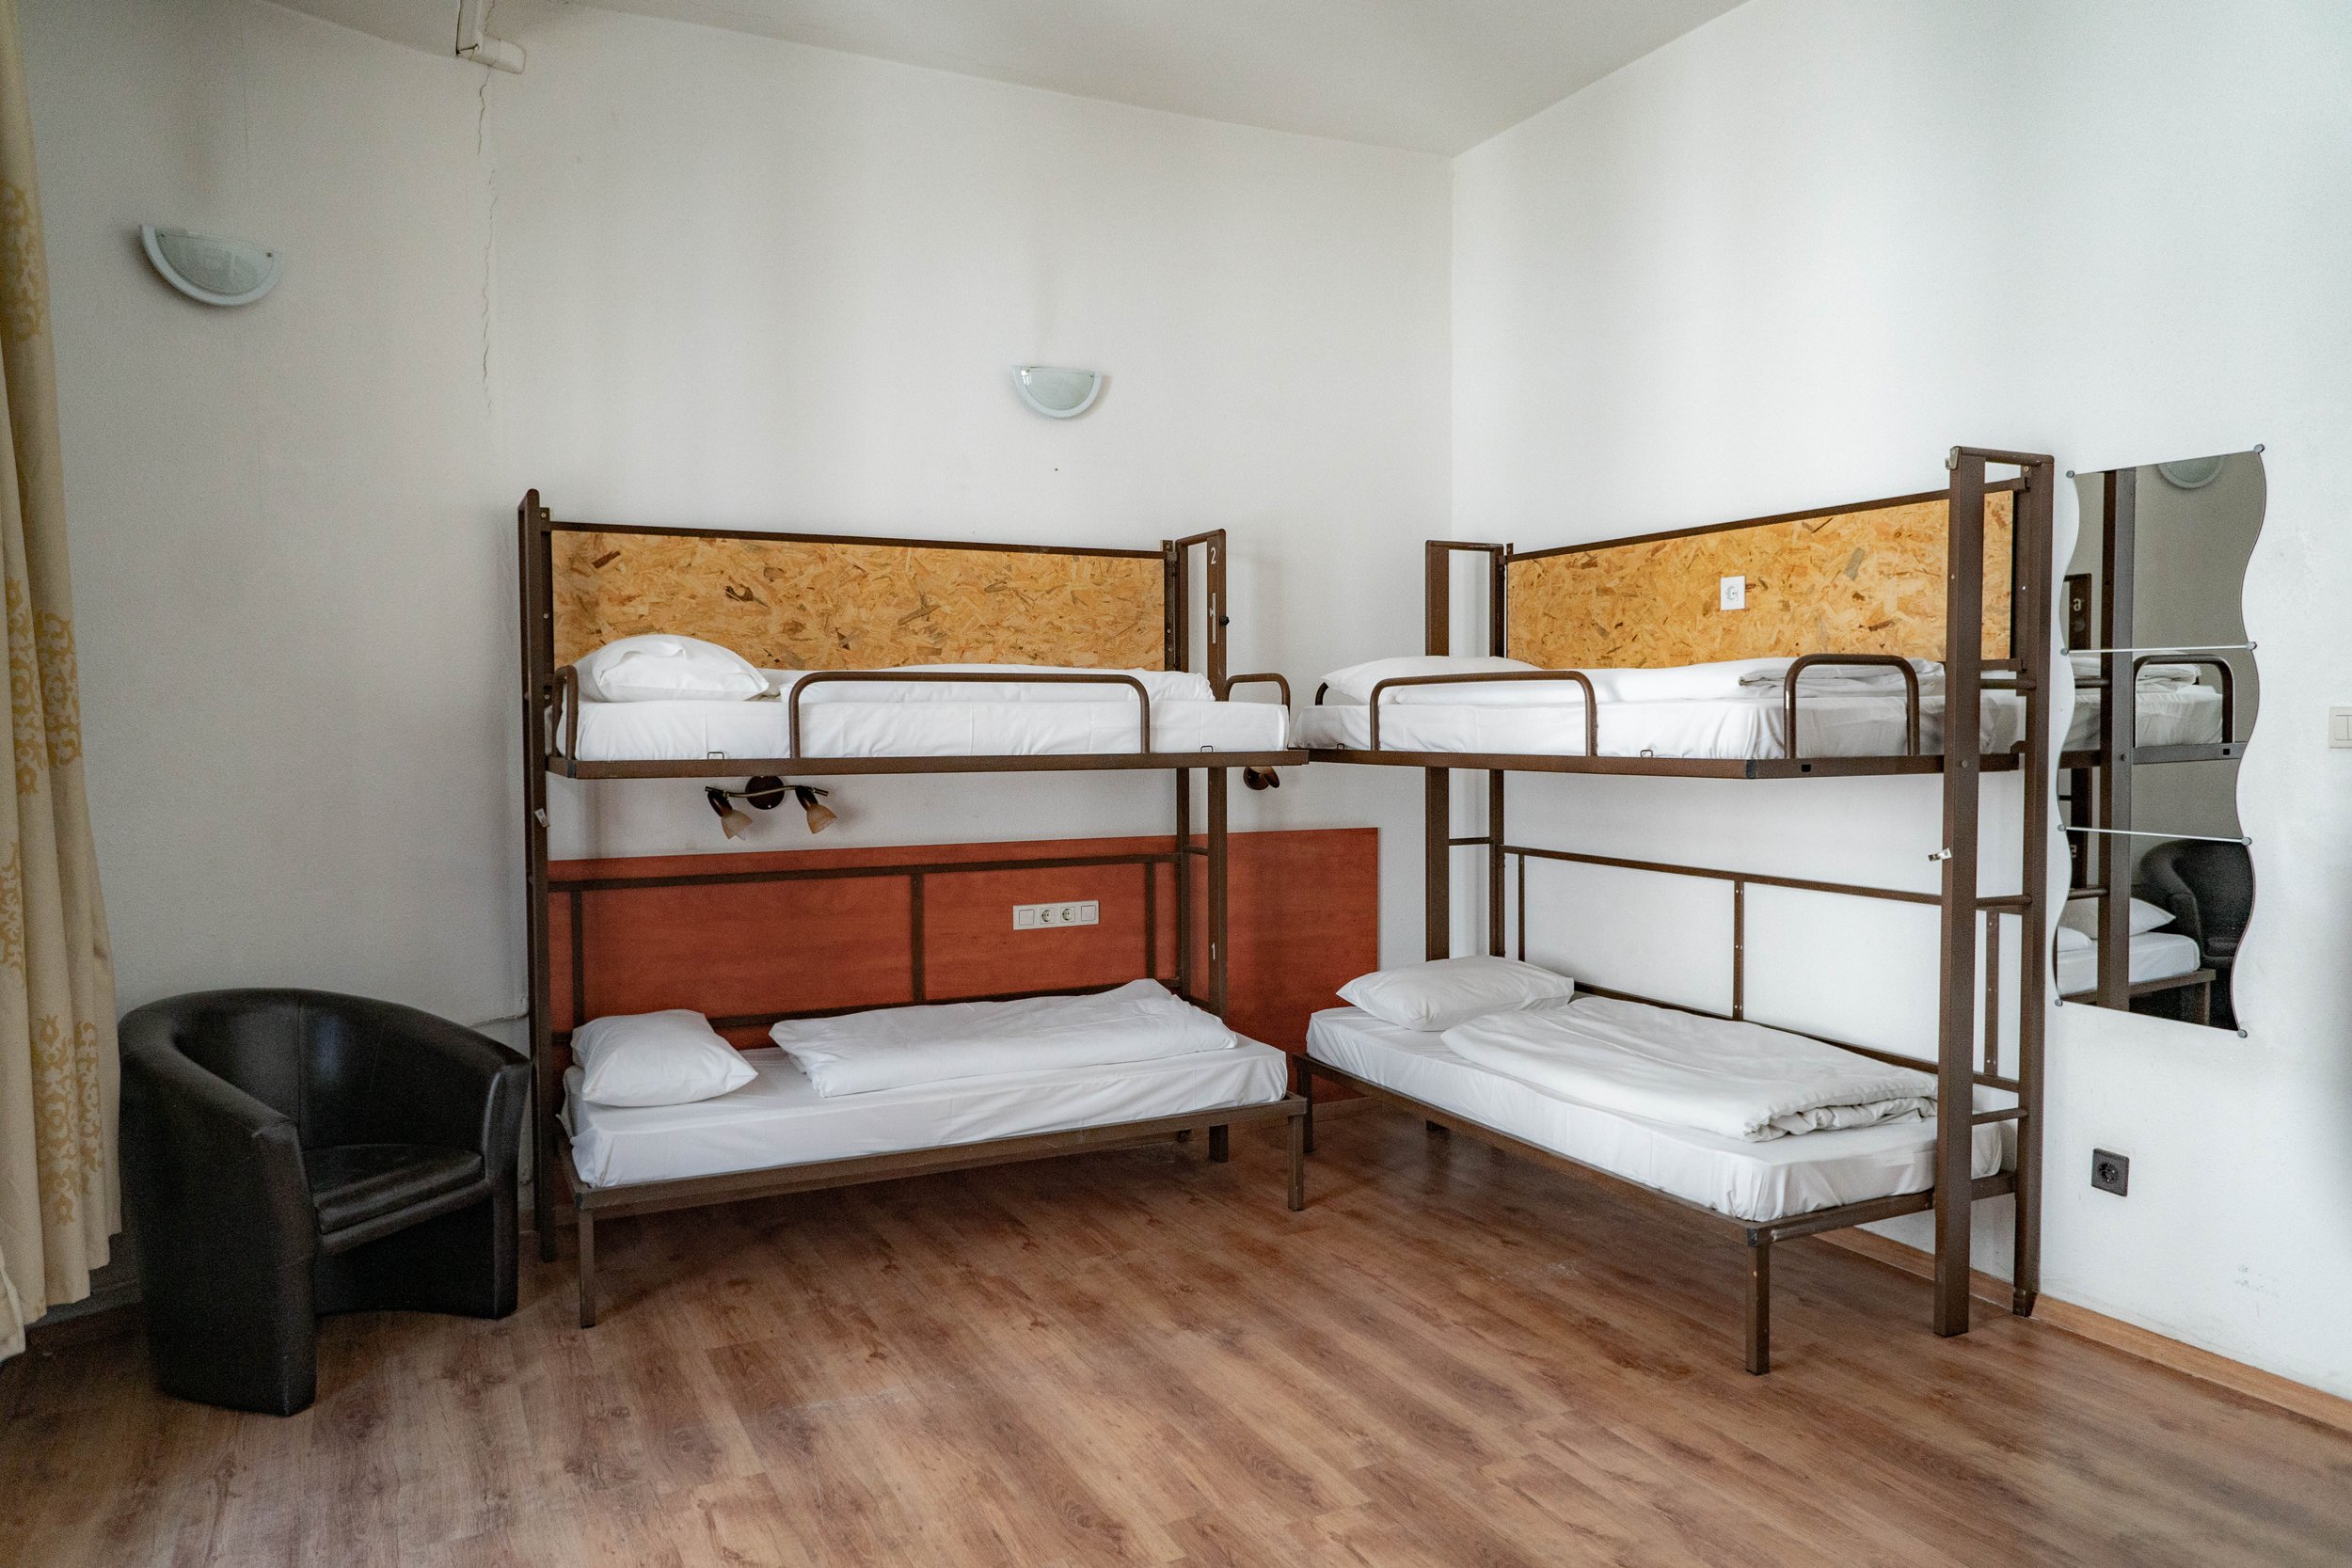 Equity Point Budapest Private Room 4-bed Dorm.jpg